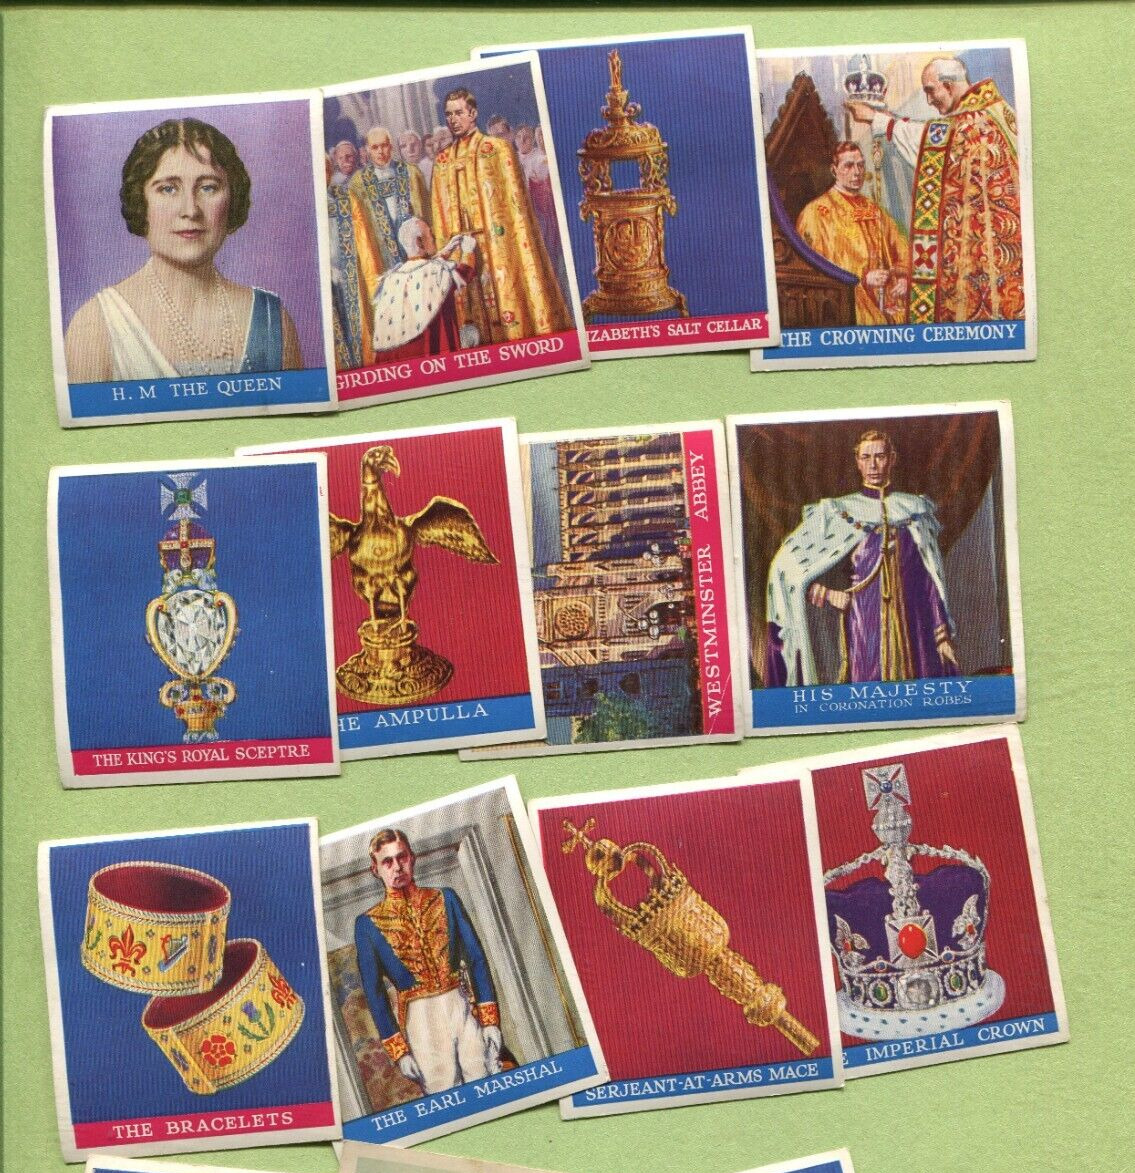 1937 GODFREY PHILLIPS CIGARETTES CORONATION OF THEIR MAJESTIES 14 MIXED CARDS